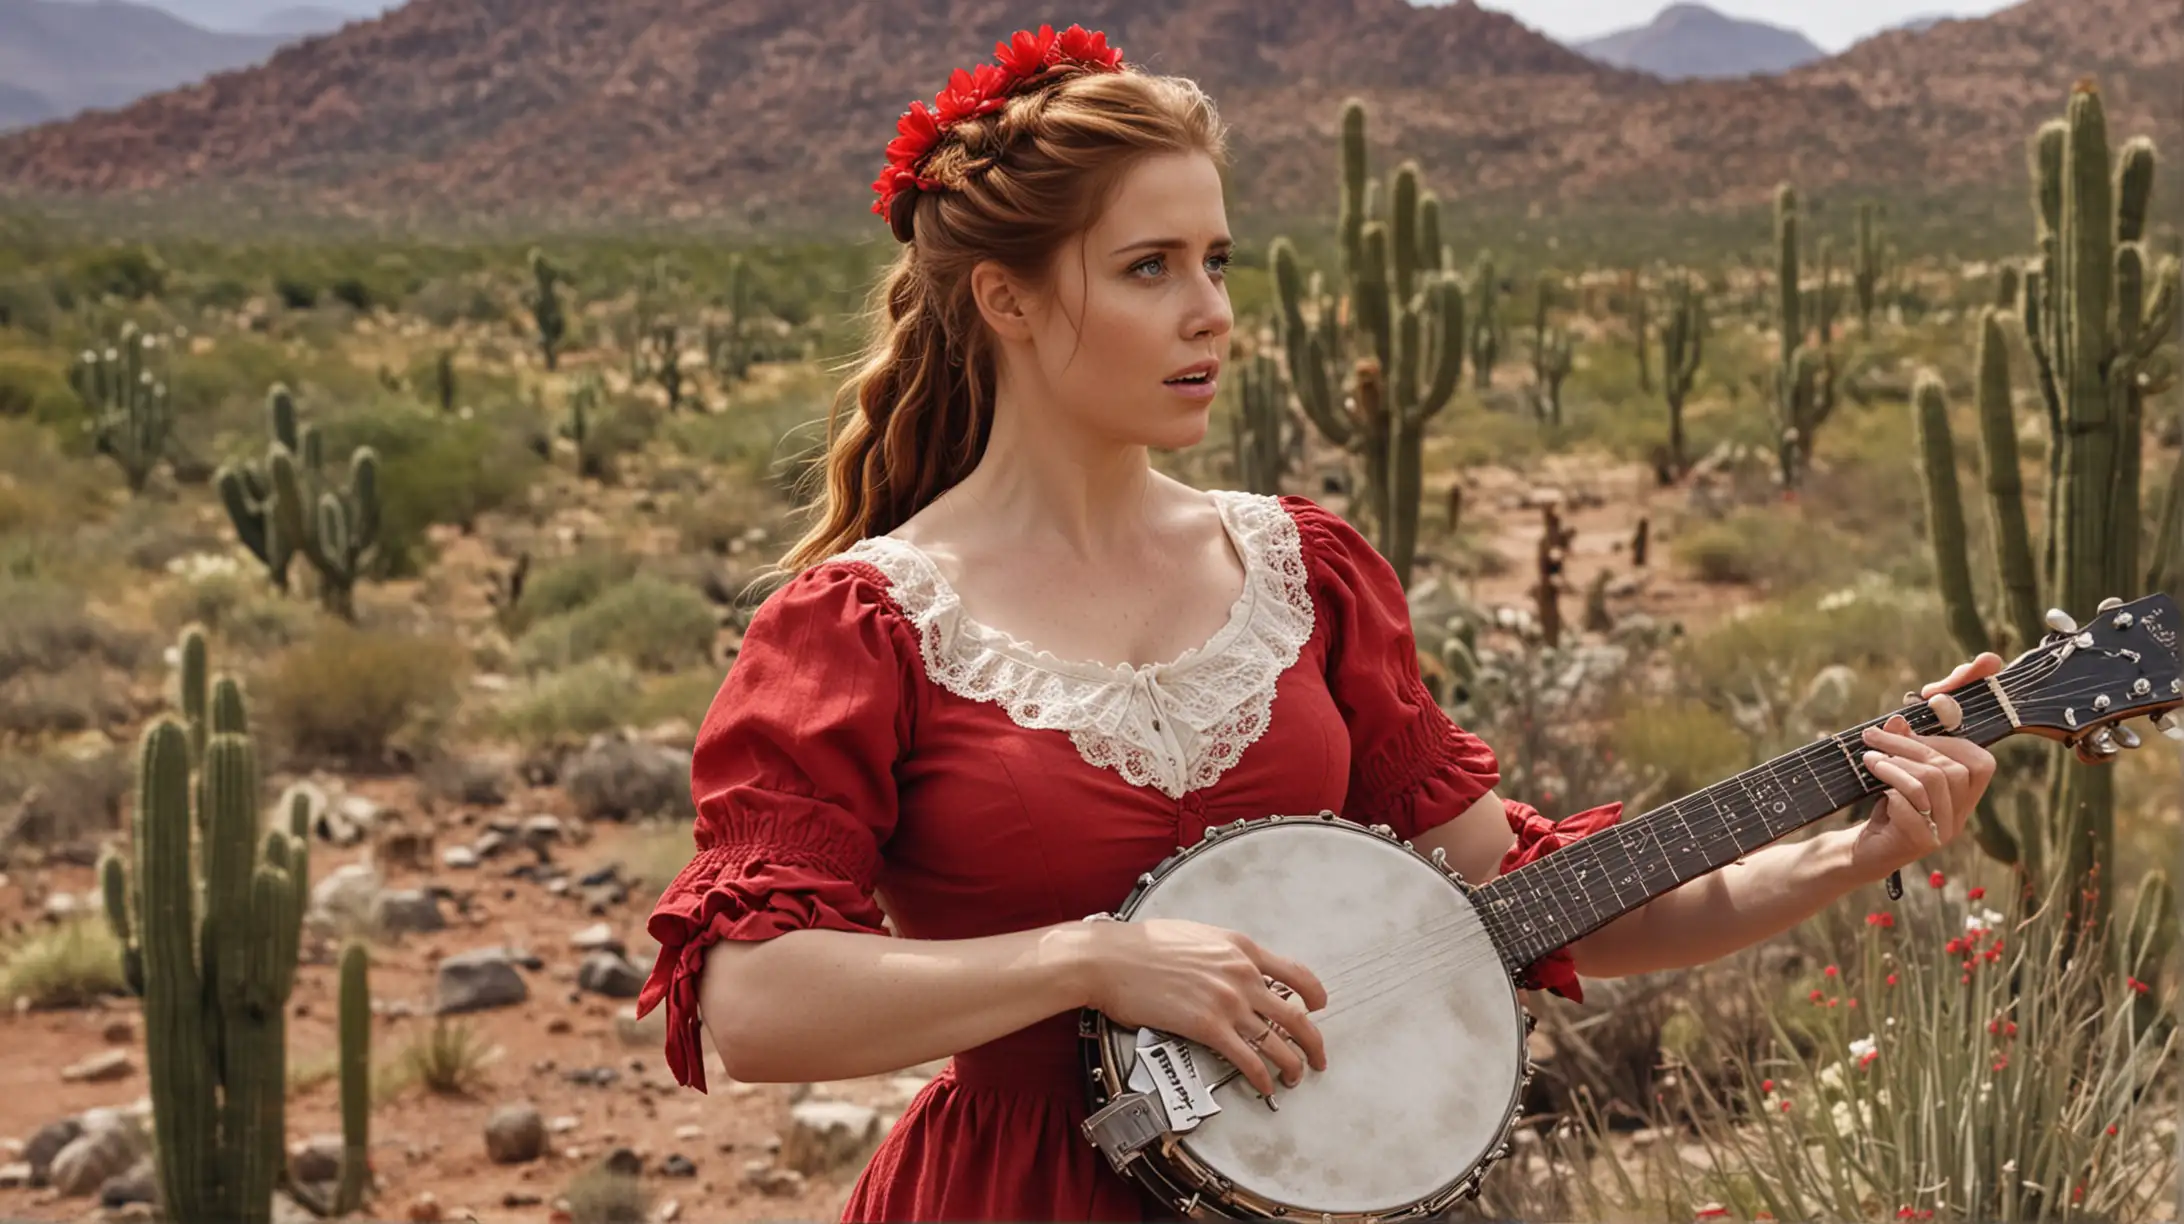 Amy Adams, 5 fingers only, playing banjo, freckles, perky figure, very big boobs, pigtails, sexy red clothers, outdoors, seductive pose, natural lighting, Wild West, prairie, huge blooming cacti